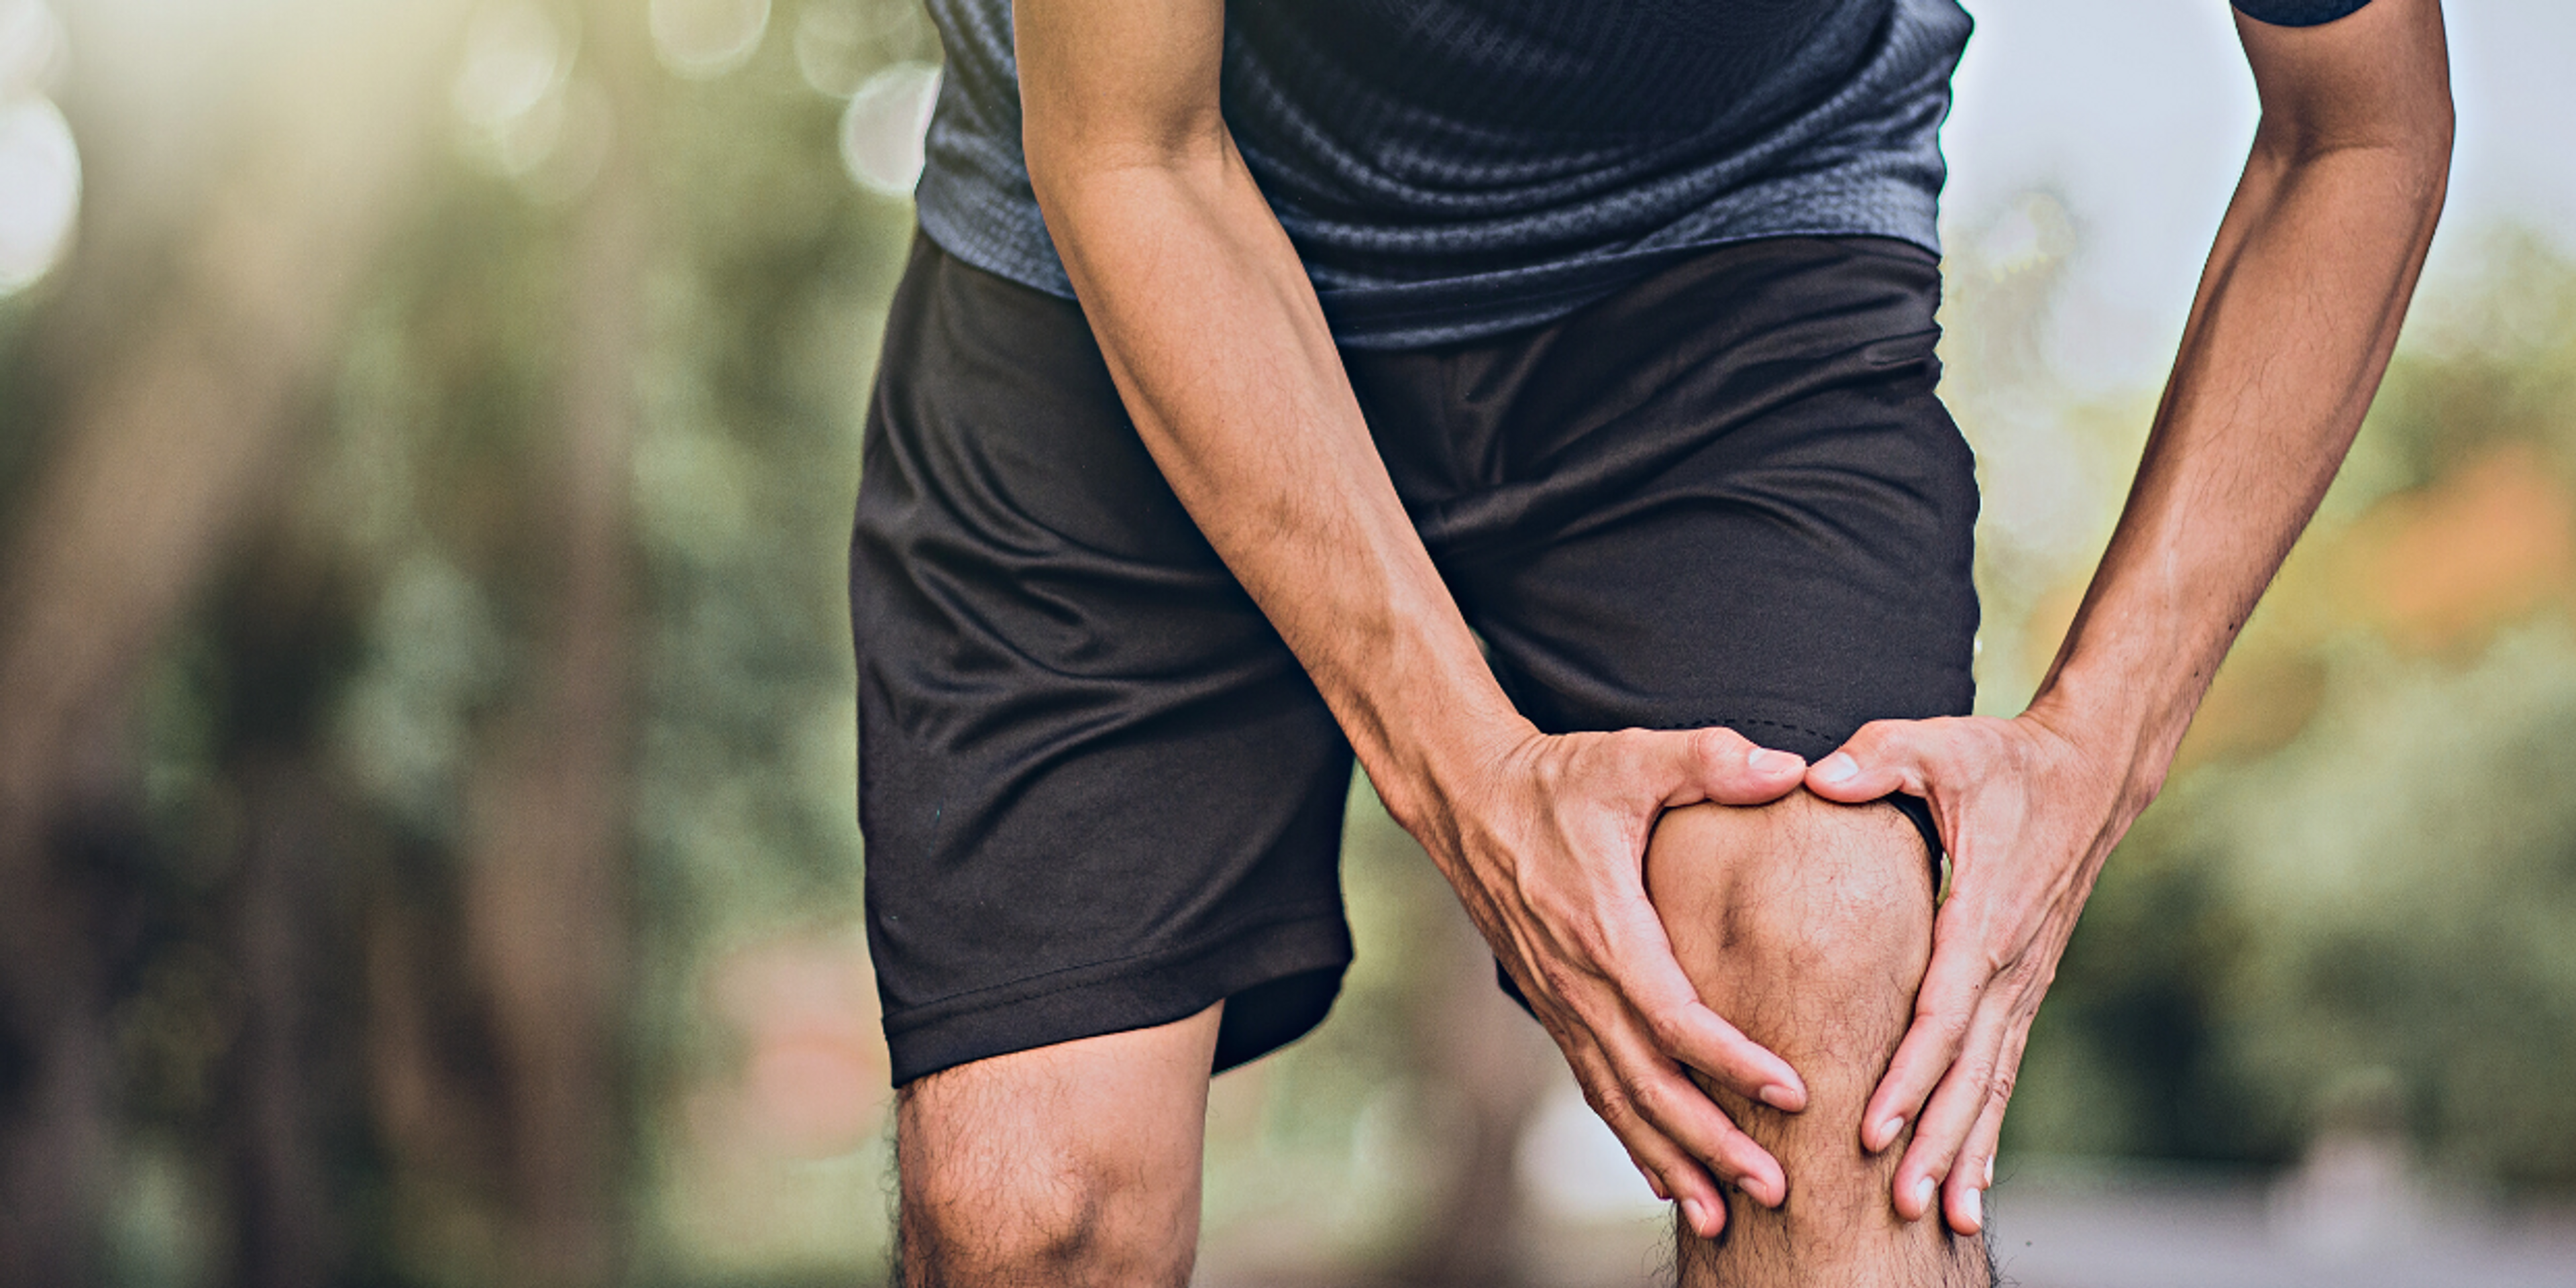 Exercises for a sprained knee - learn what works best and why.